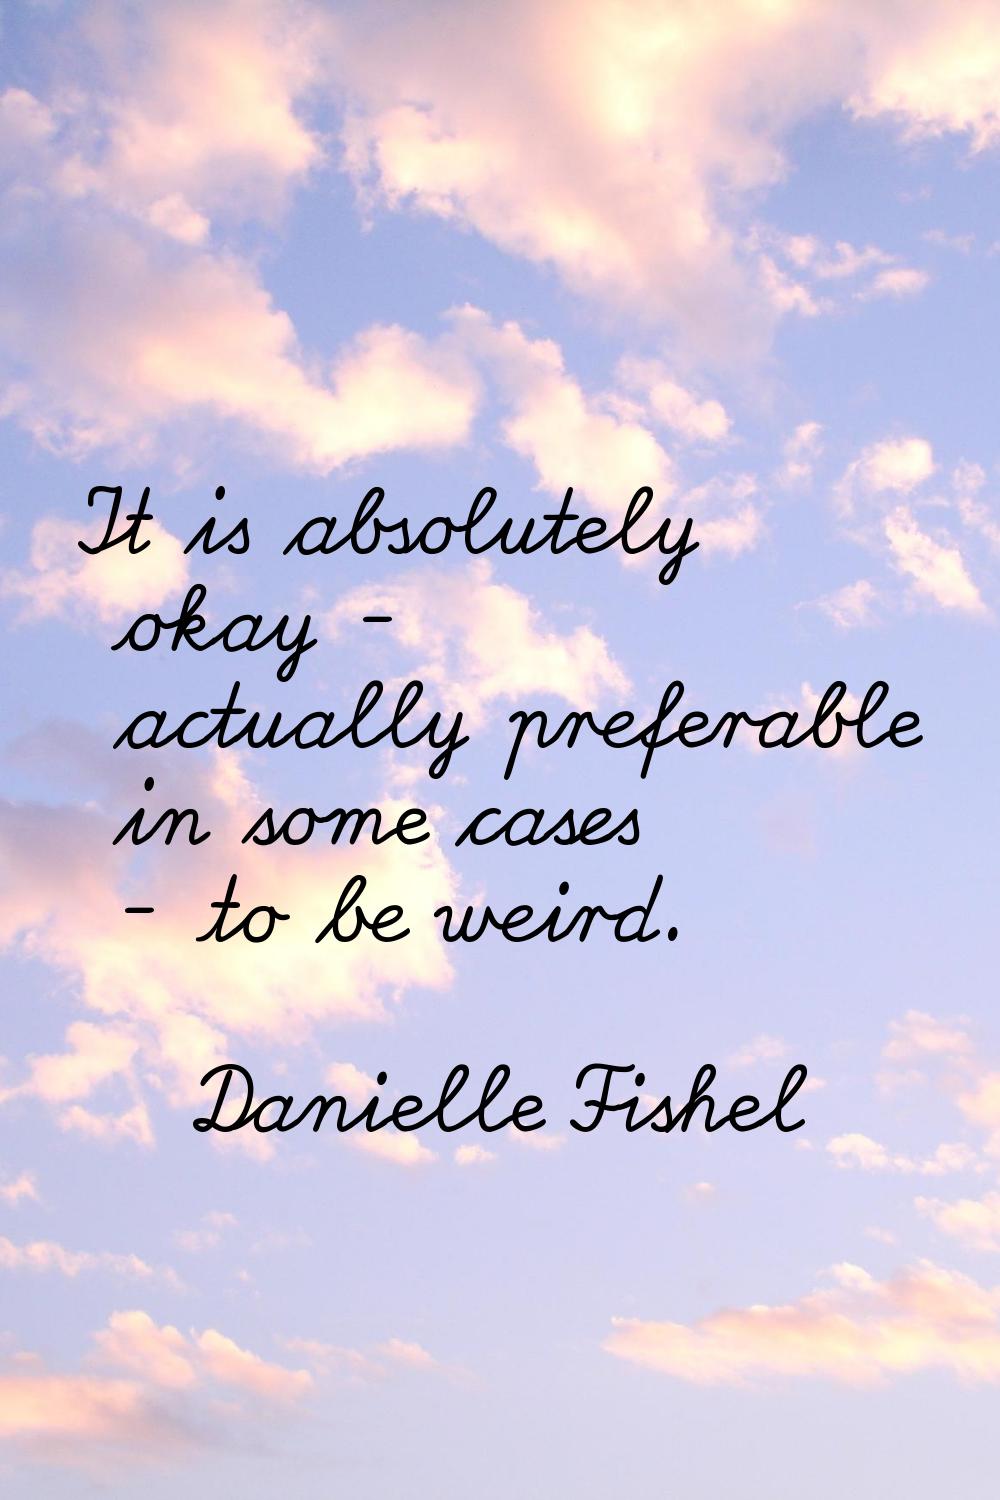 It is absolutely okay - actually preferable in some cases - to be weird.